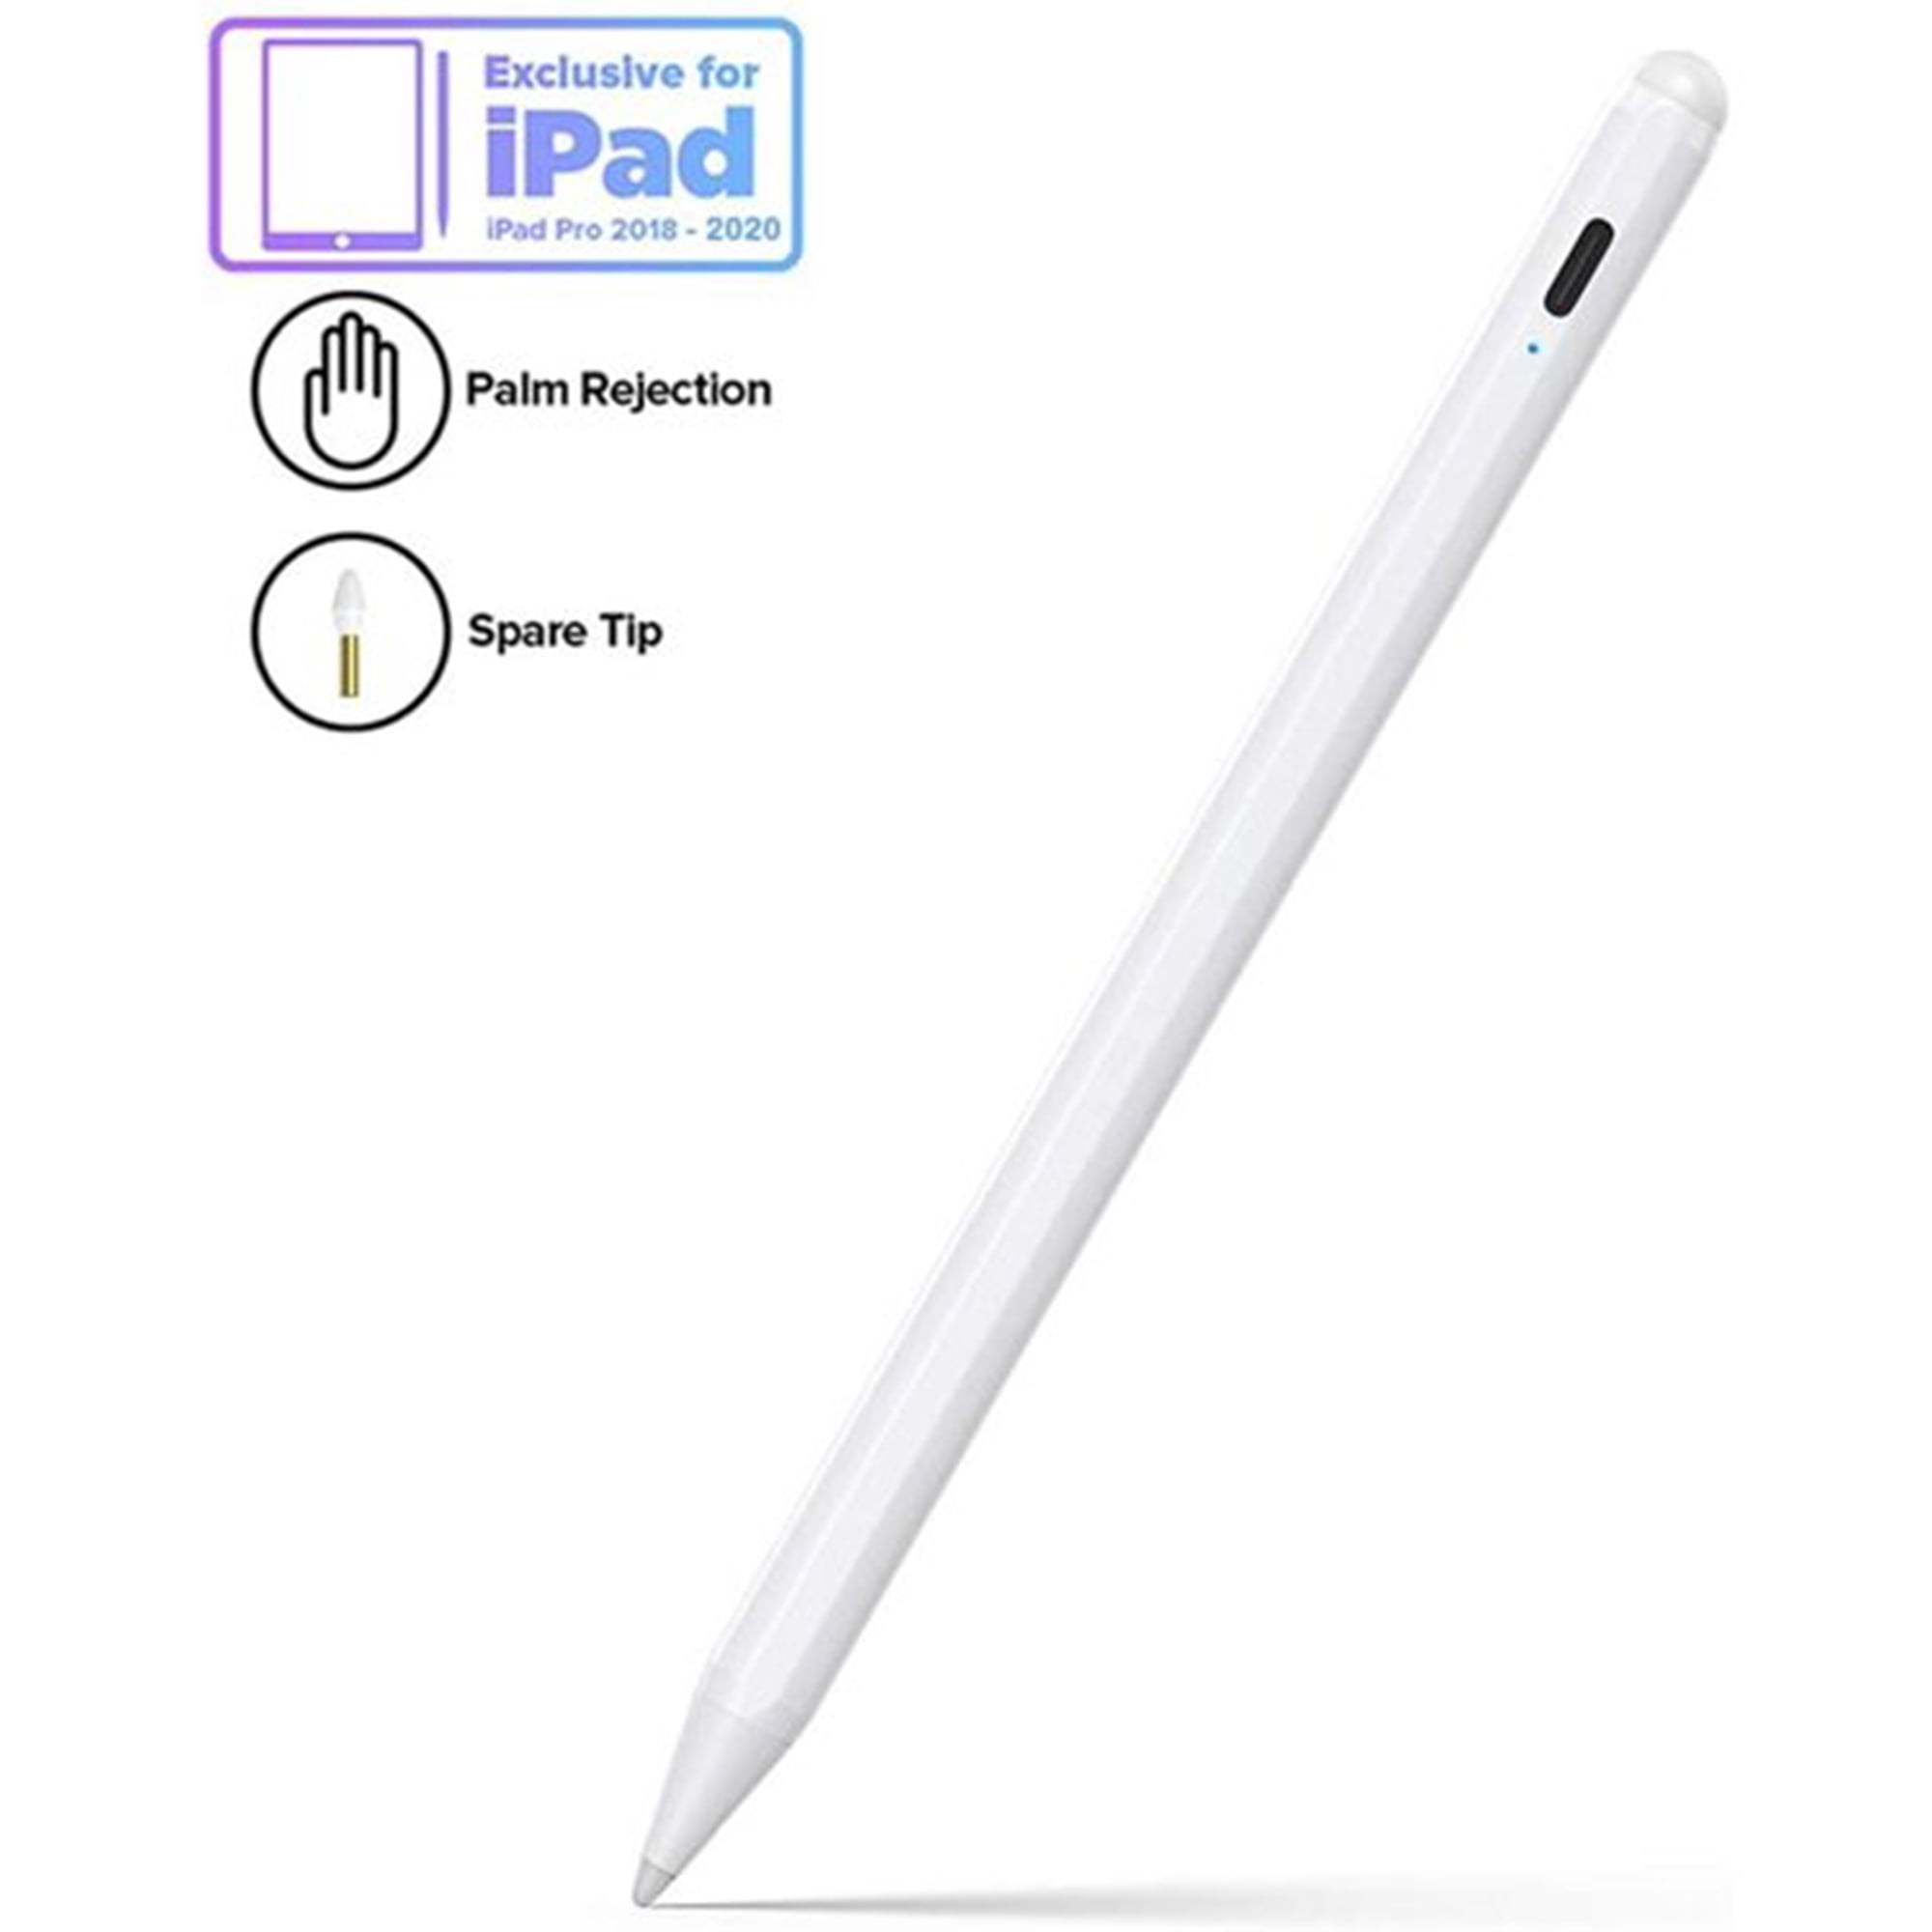 11/12.9 Inch iPad Pro 2018-2020 iPad Air 3rd for Precise Writing/Drawing Stylus Pen for iPad with Palm Rejection,Active Pencil Compatible with ,iPad 6/7 Gen,iPad Mini 5th Black